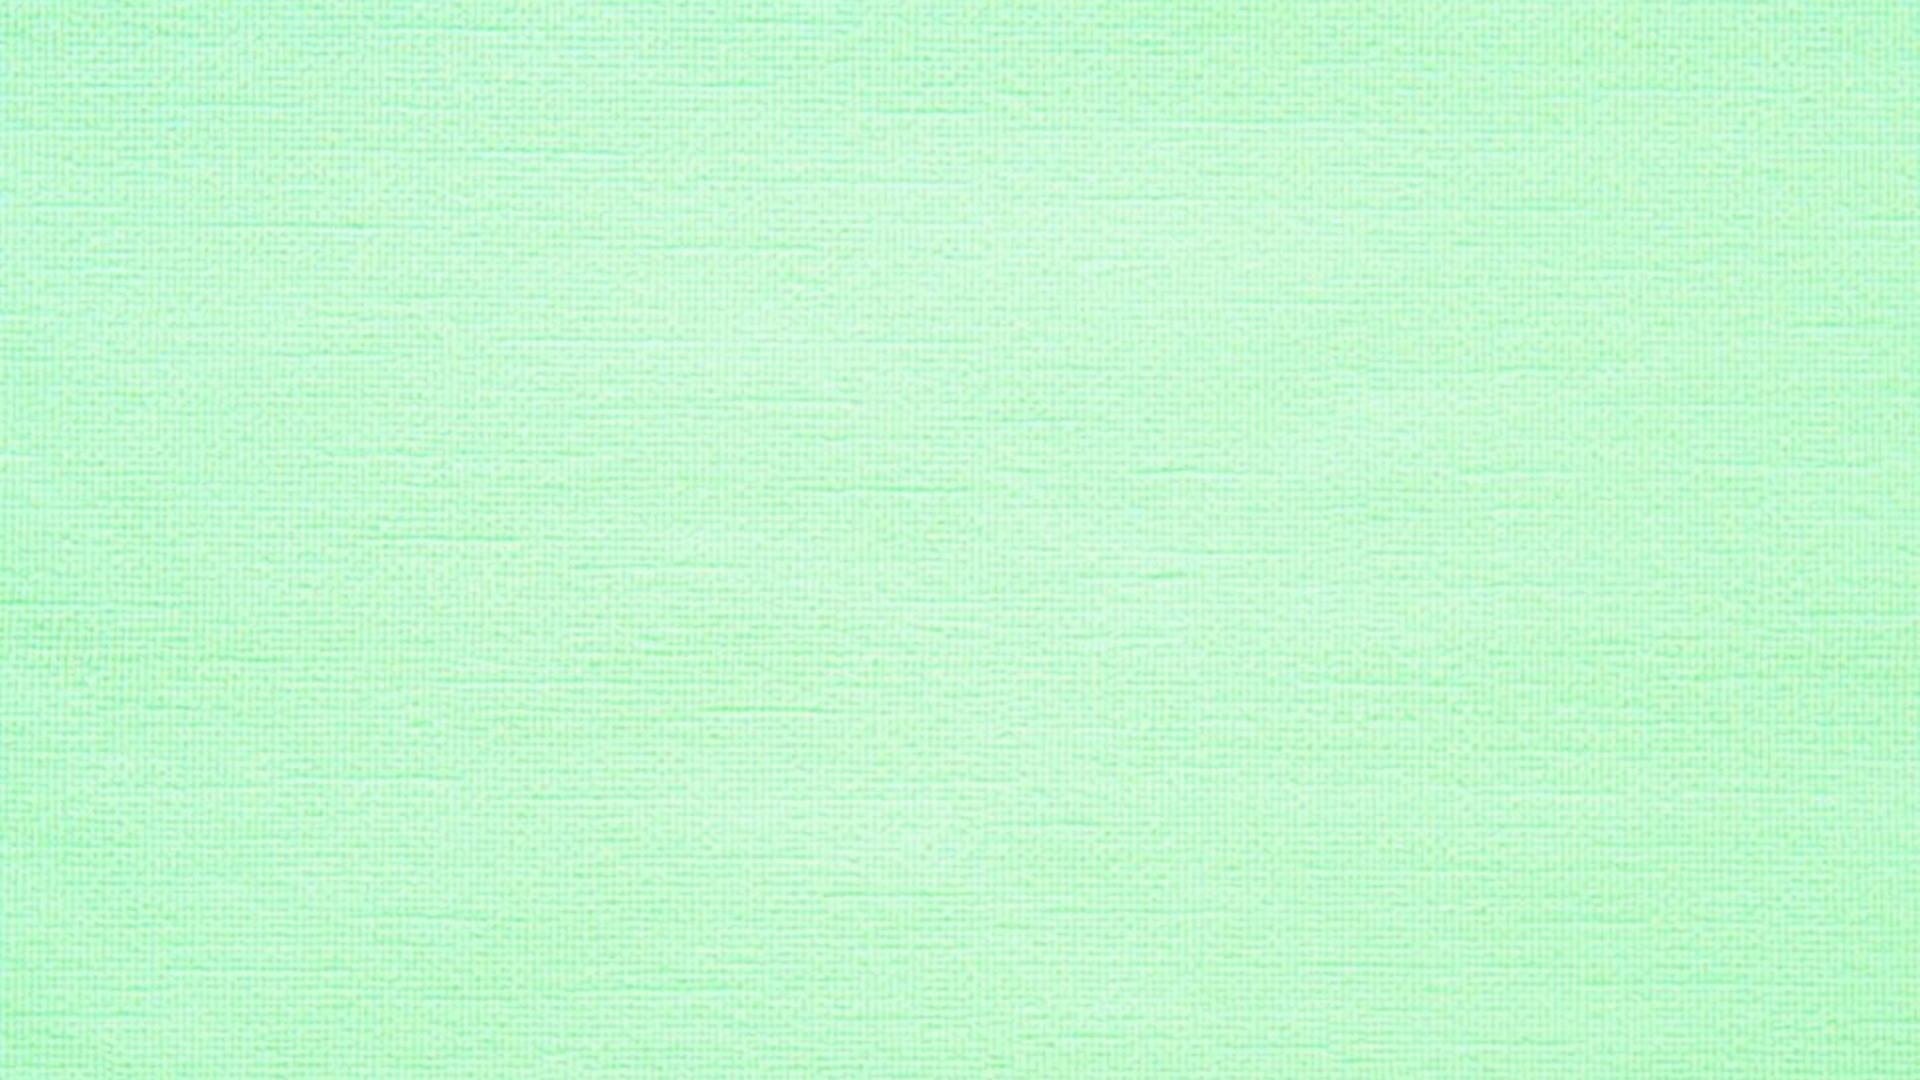 Hd Mint Green Backgrounds With Image Resolution Pixel - Colorfulness - HD Wallpaper 